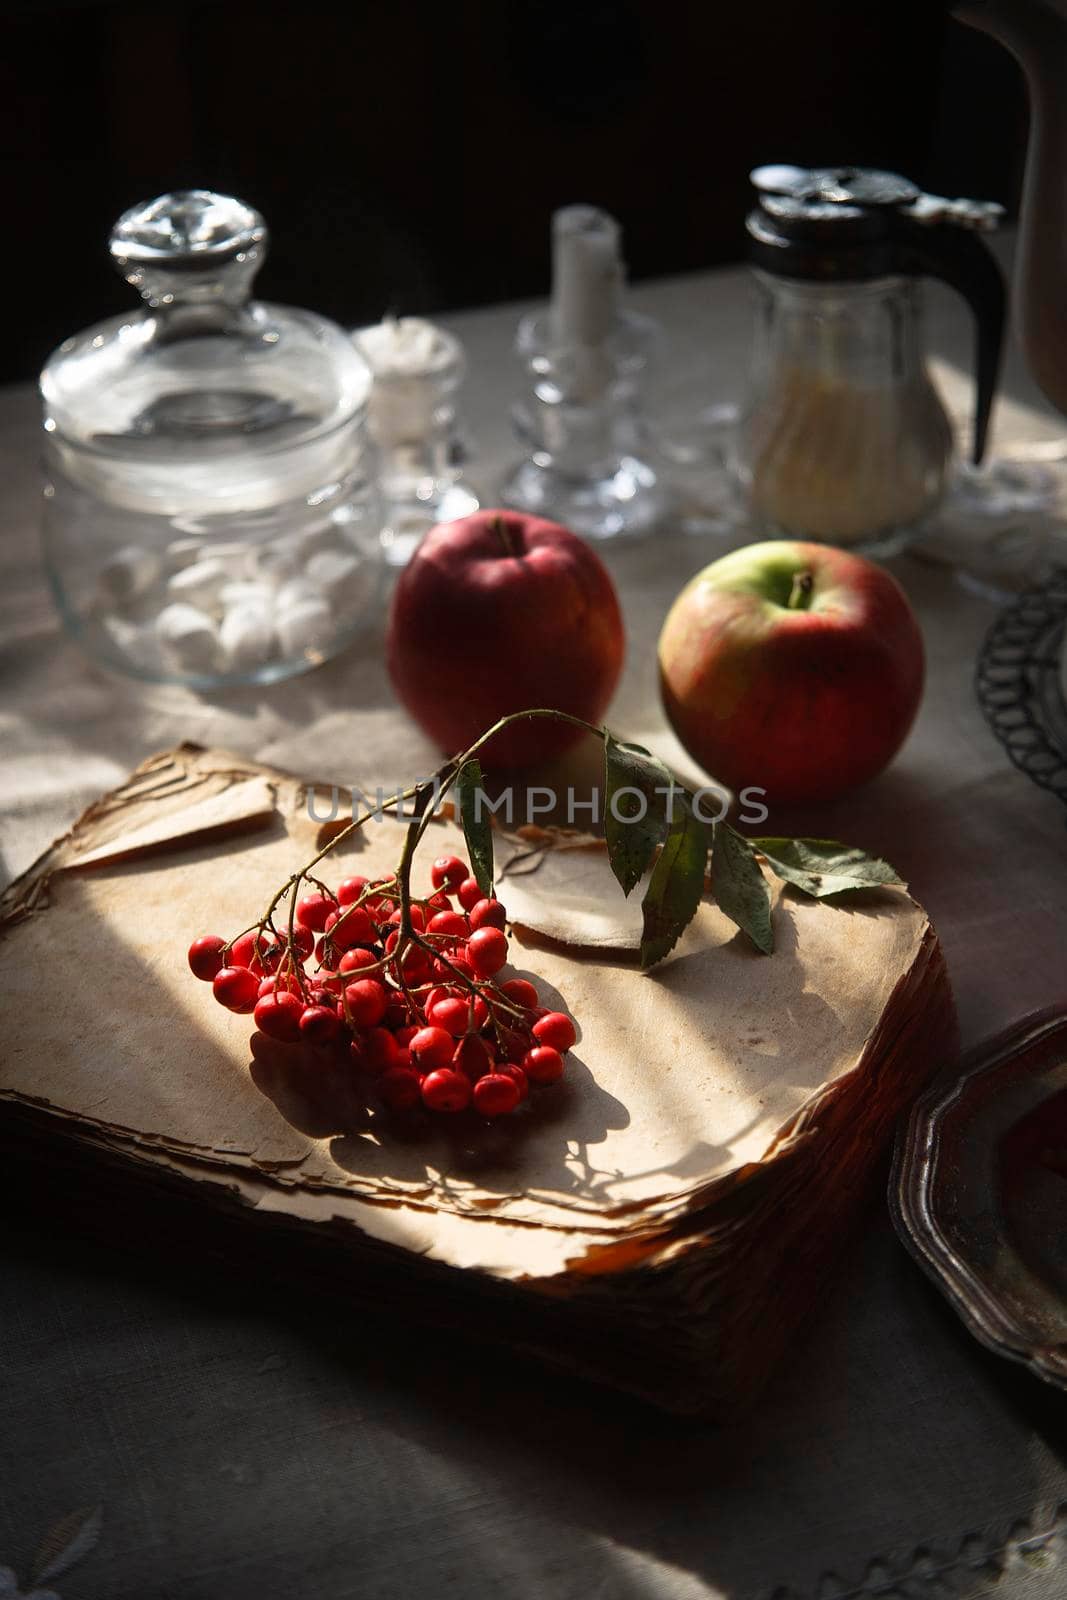 A bunch of rowan lying on the old and scrubby book, two red apples and the other tableware for tea time on gray rustic table, autumn morning concept. by Vera_FoodandGarden